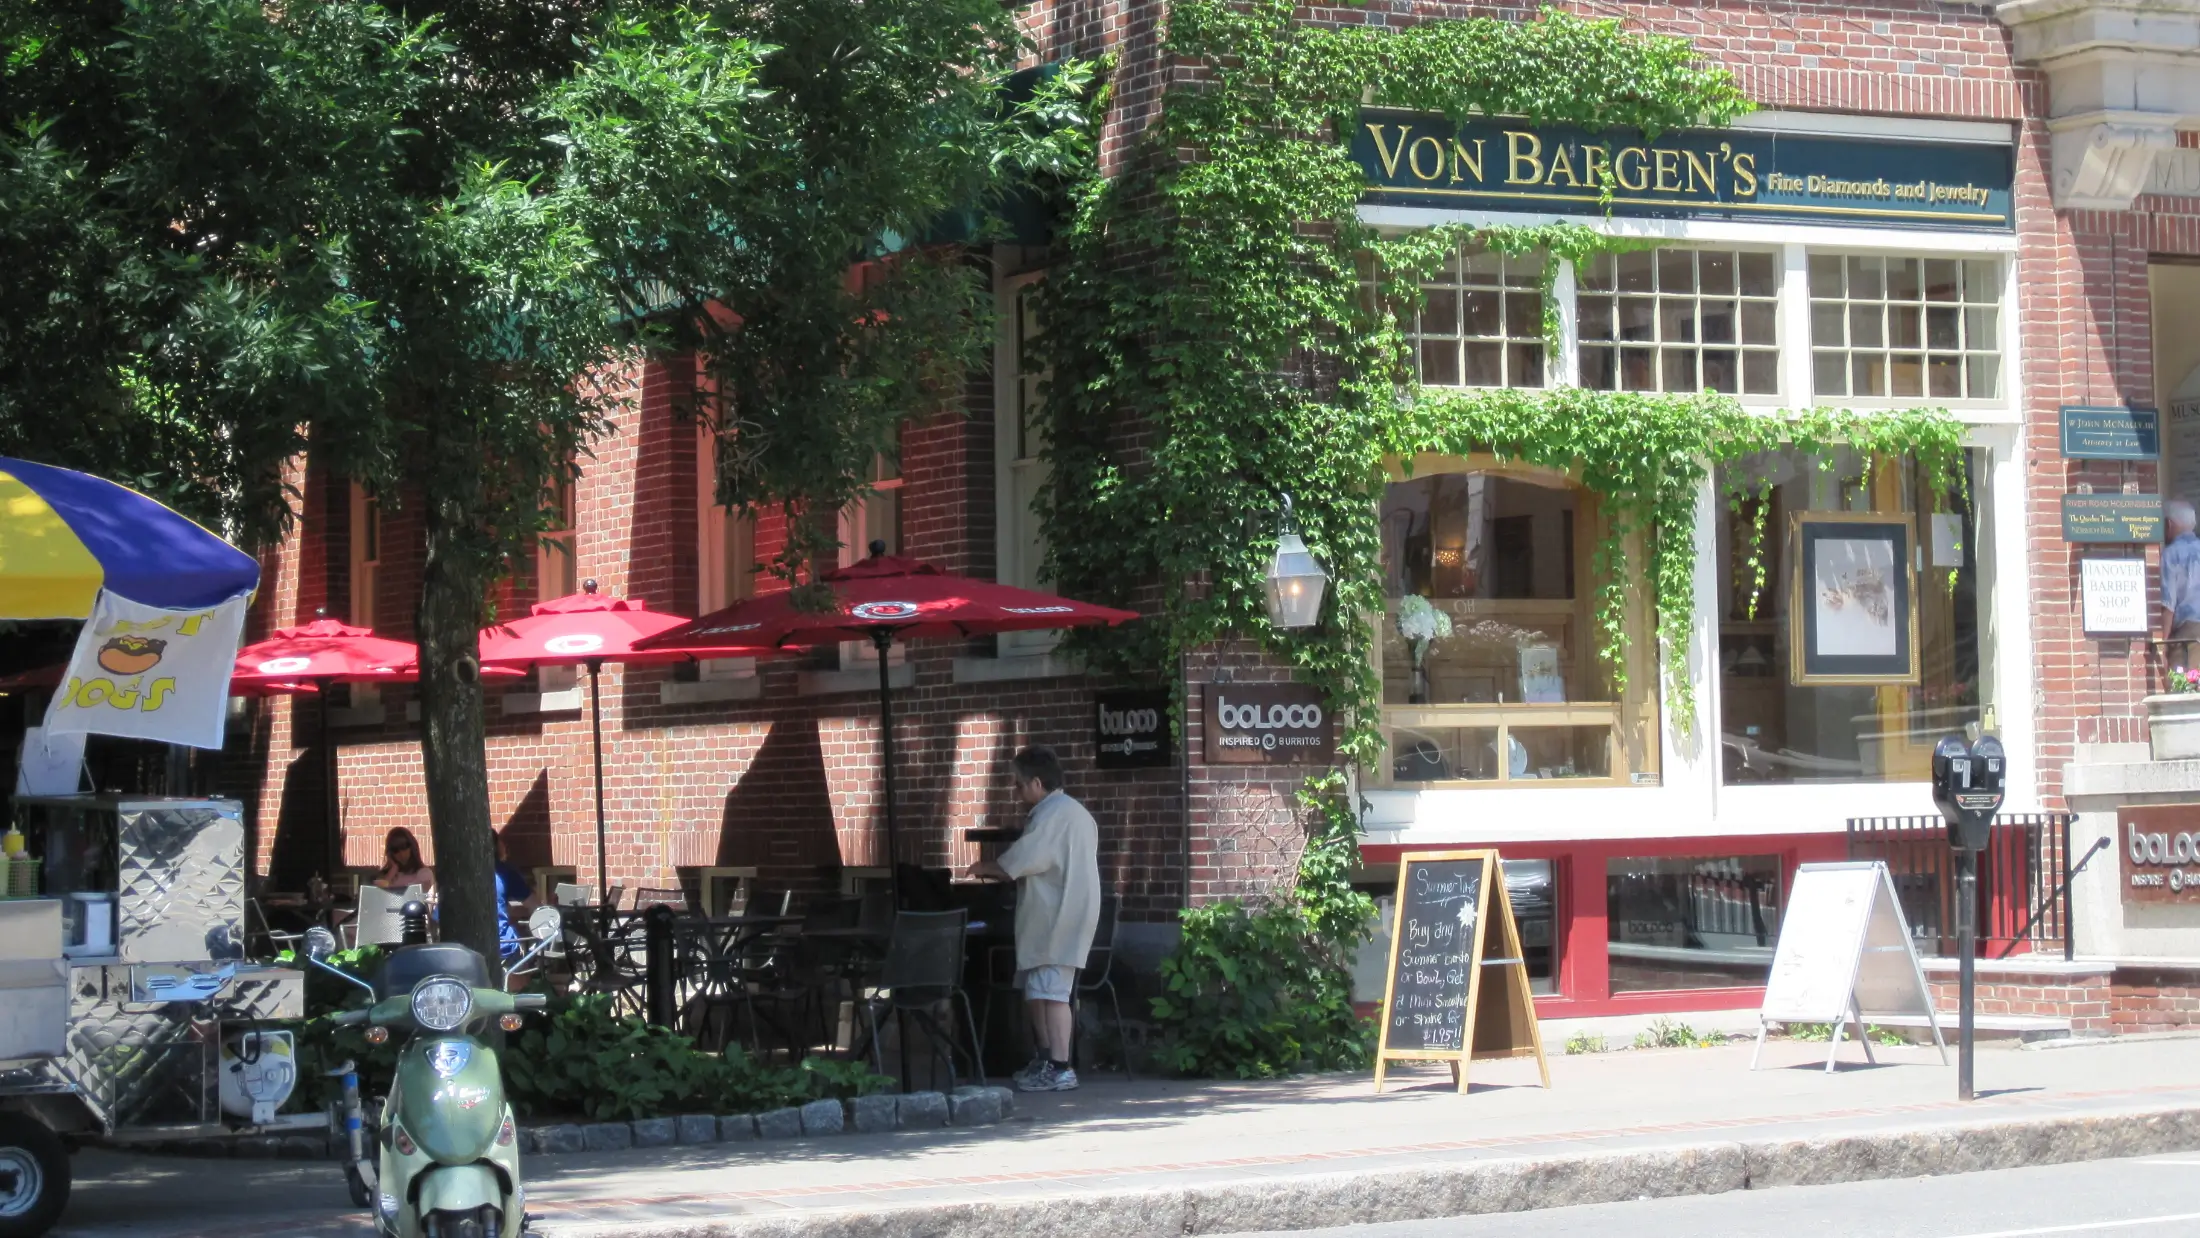 Summertime outdoor diners at a restaurant in downtown Hanover, New Hampshire.